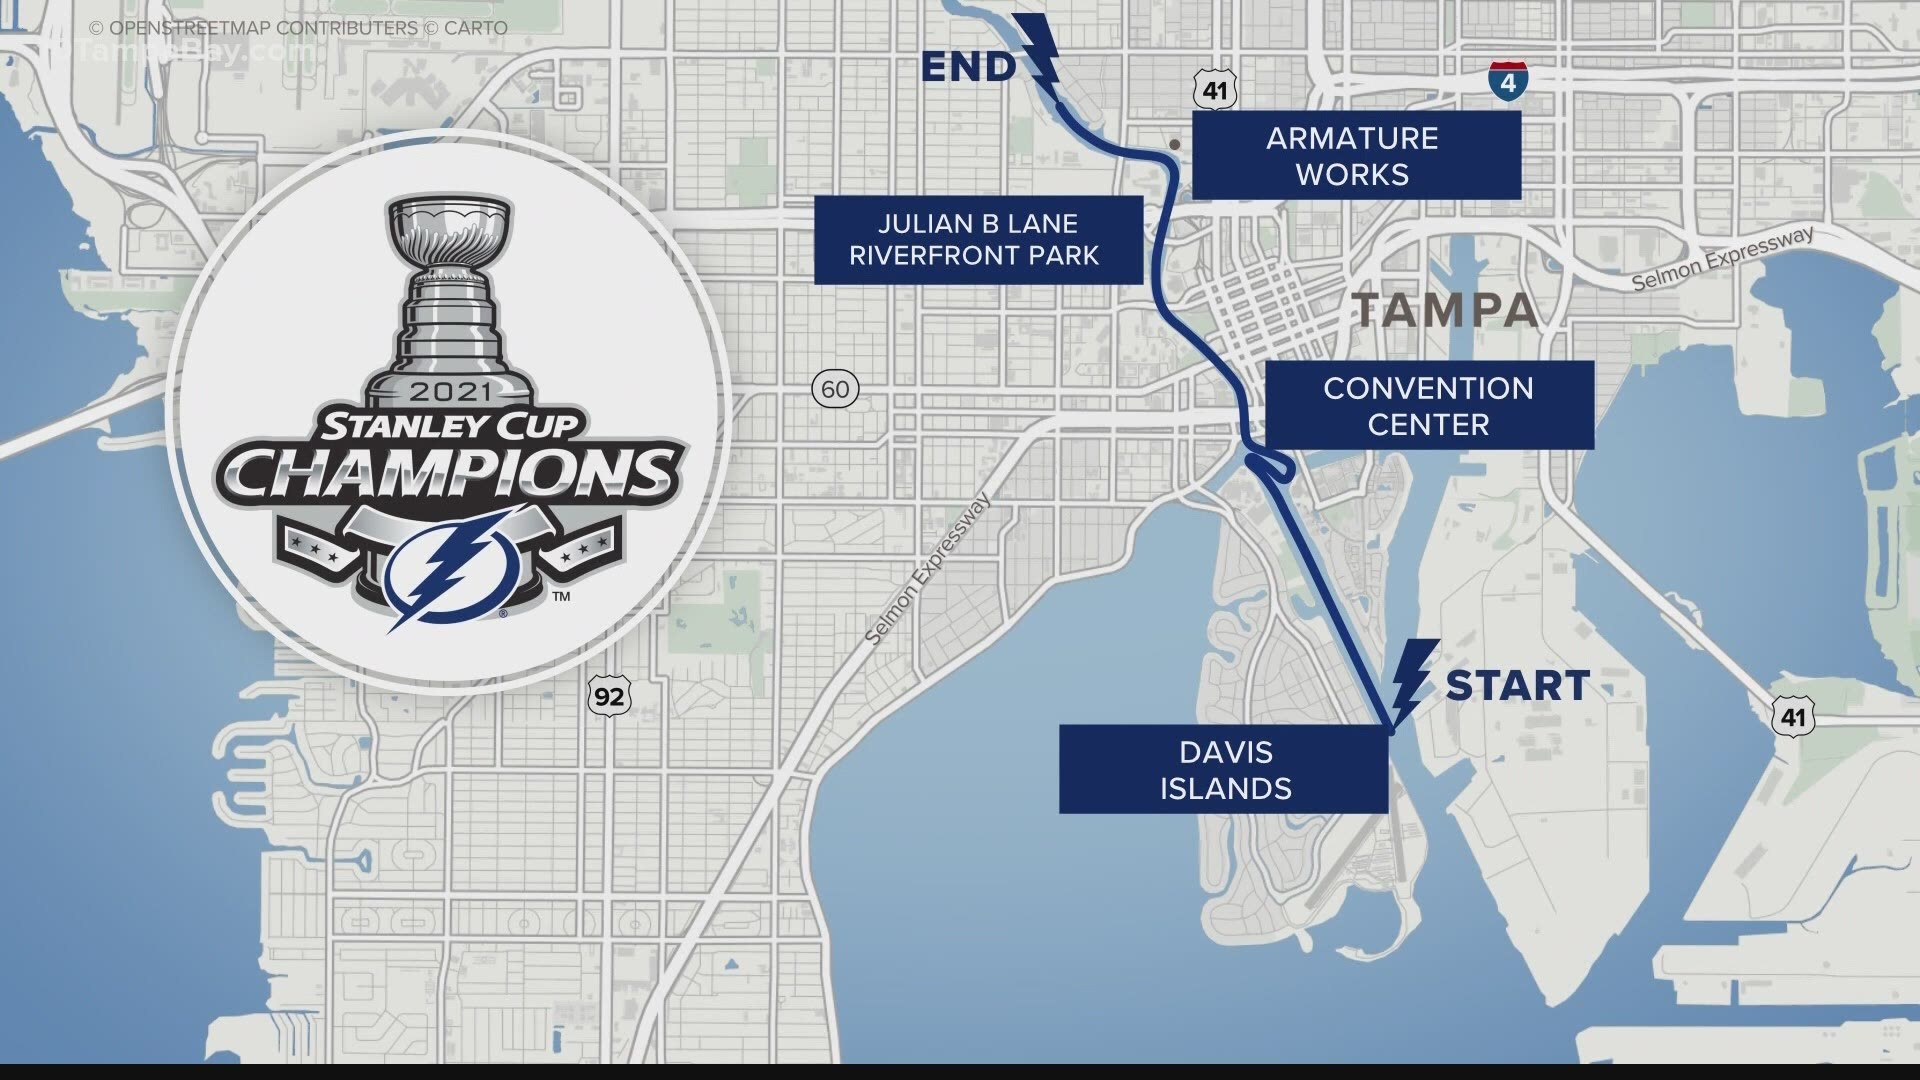 Get ready to party Bolts fans! The boat parade festivities are back.